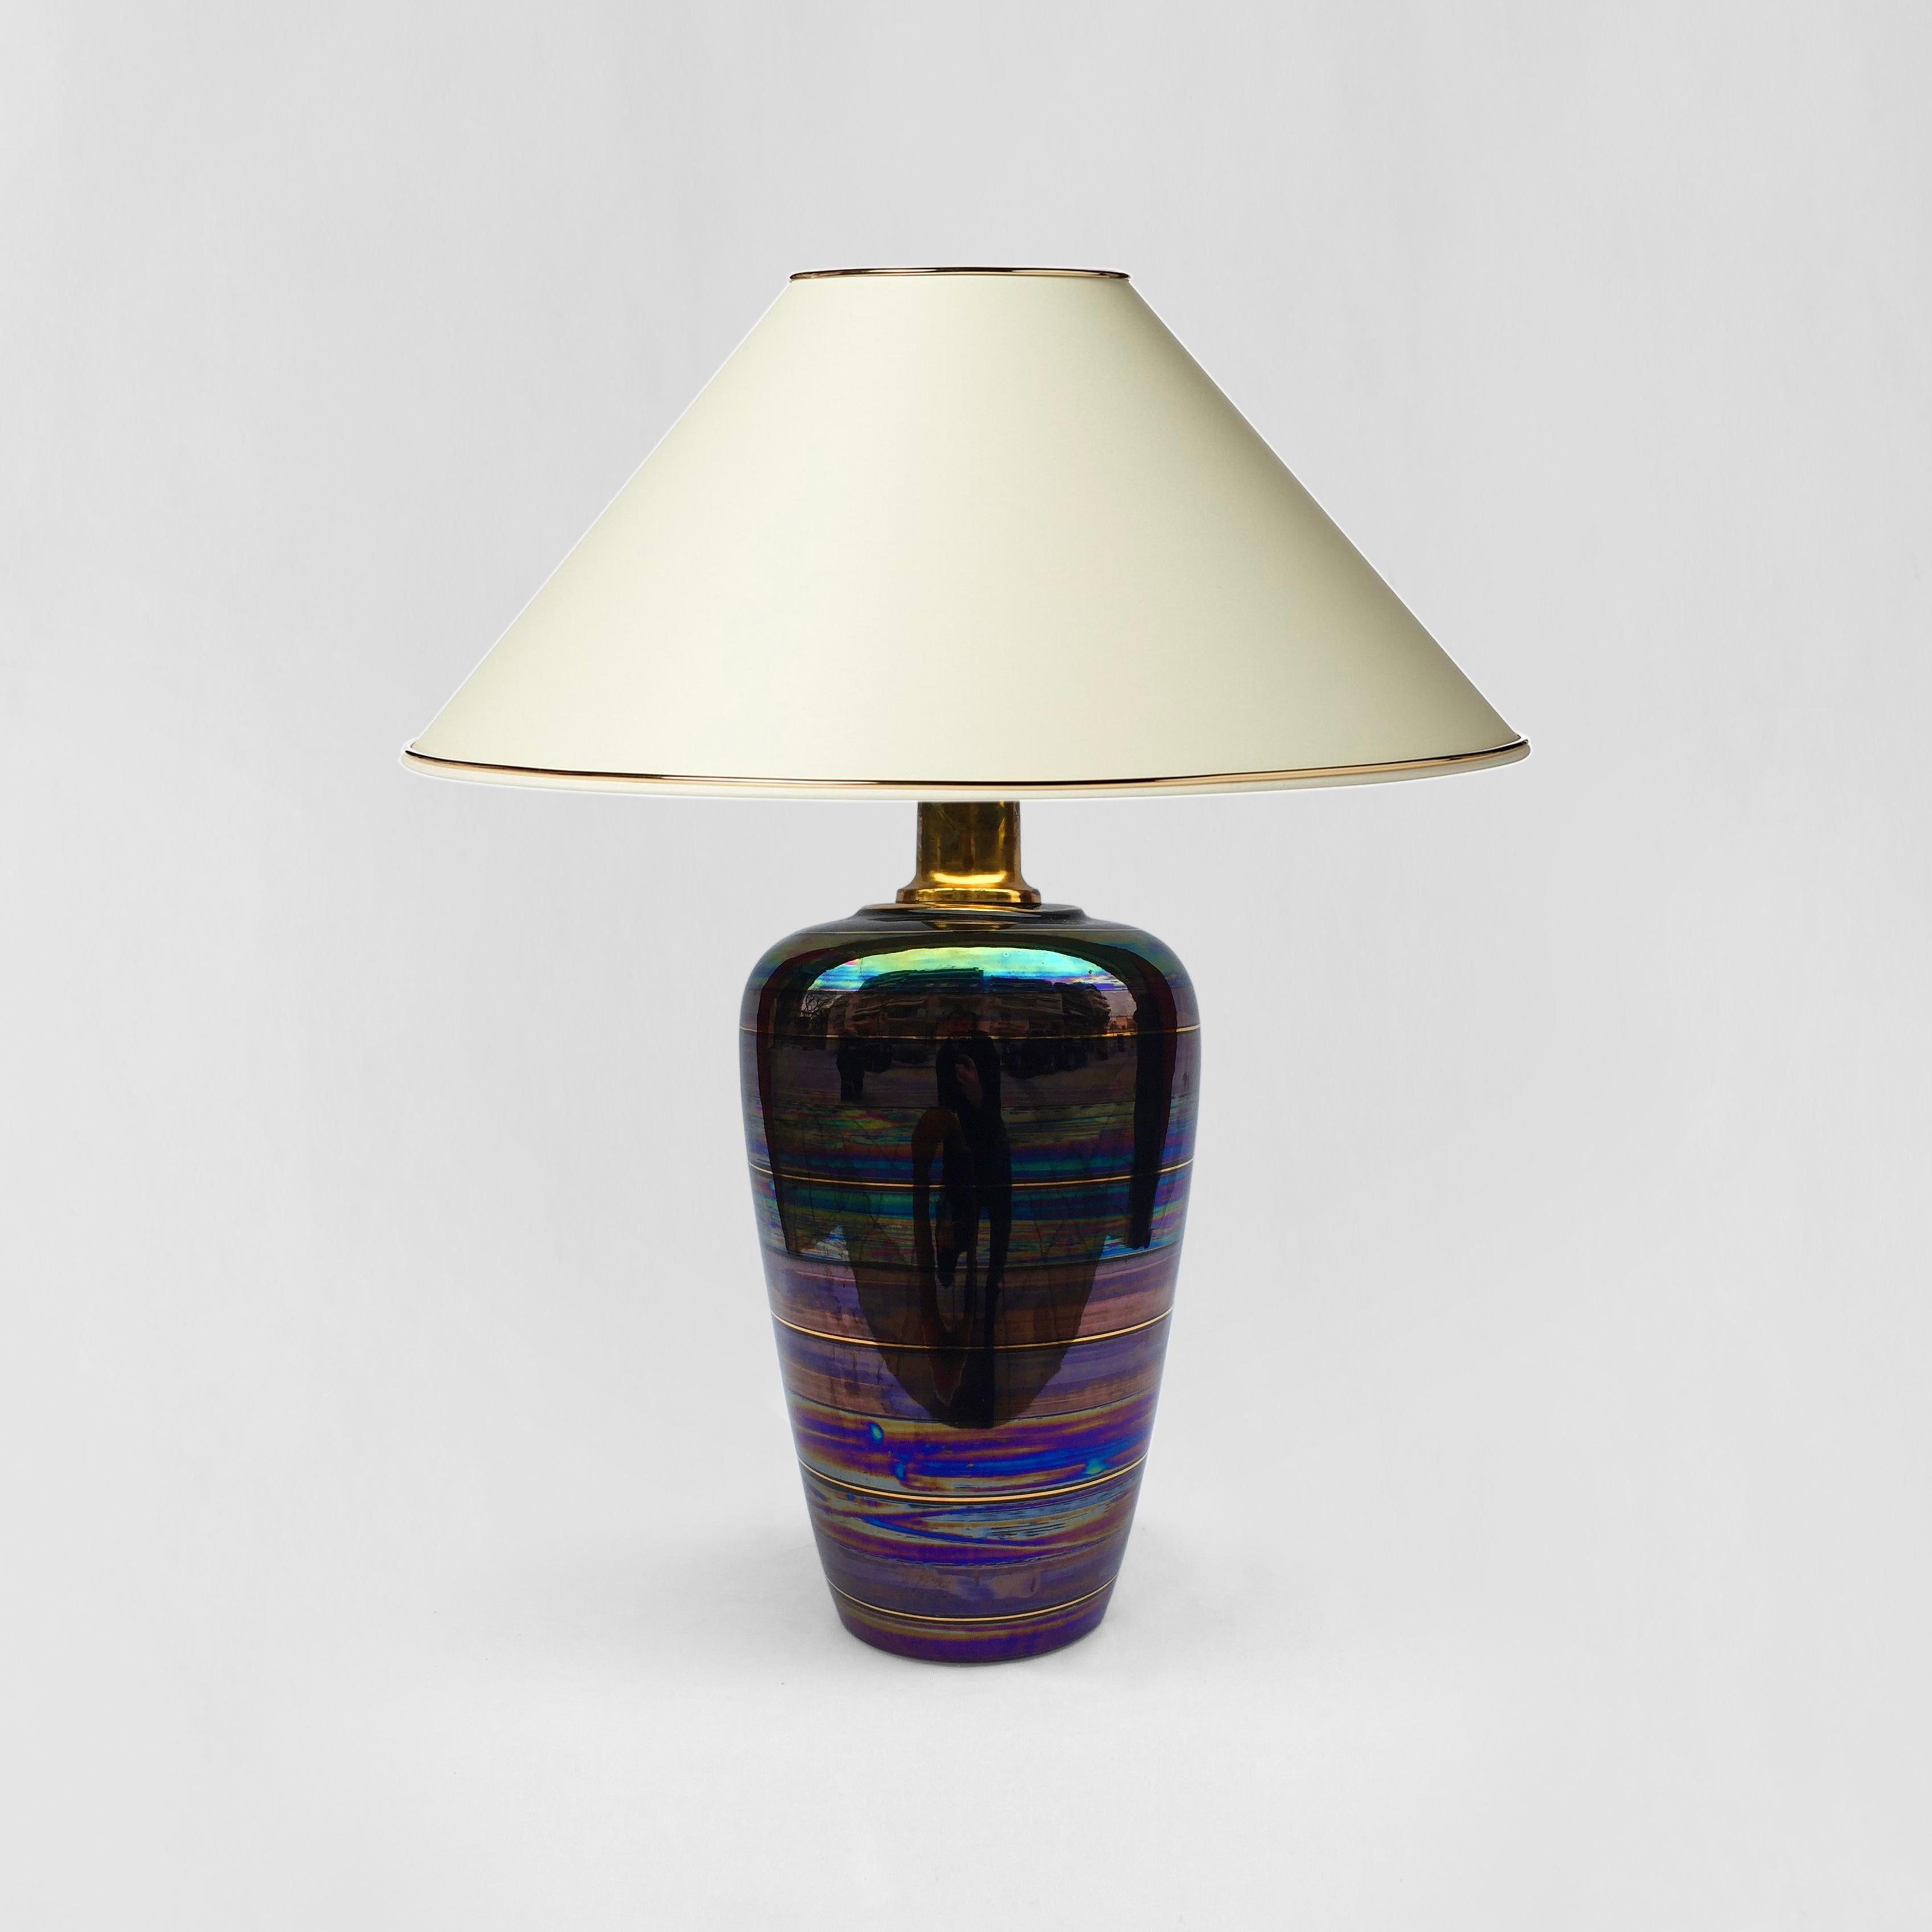 This alluring table lamp originates from the late 1970s, and is believed to have originated in the south of Italy. Composed entirely of ceramic, the vase-shaped base was dipped in to an iridescent paint mix before being glazed and hardened in the